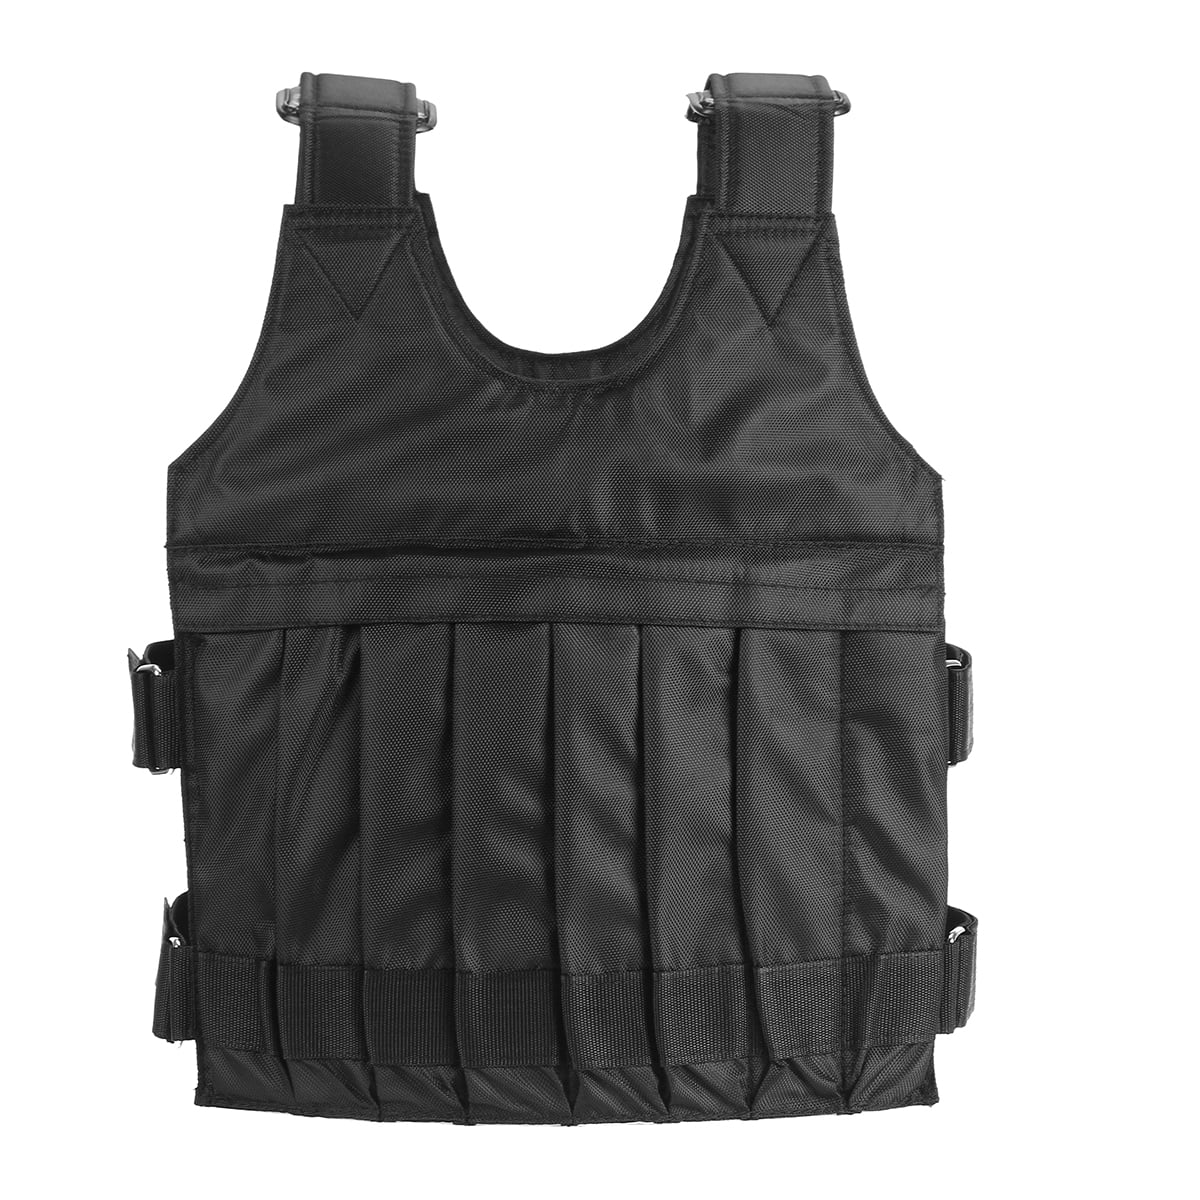 44LB/110LB Adjustable Weight Vest Weighted Workout Exercise Training Fitness US